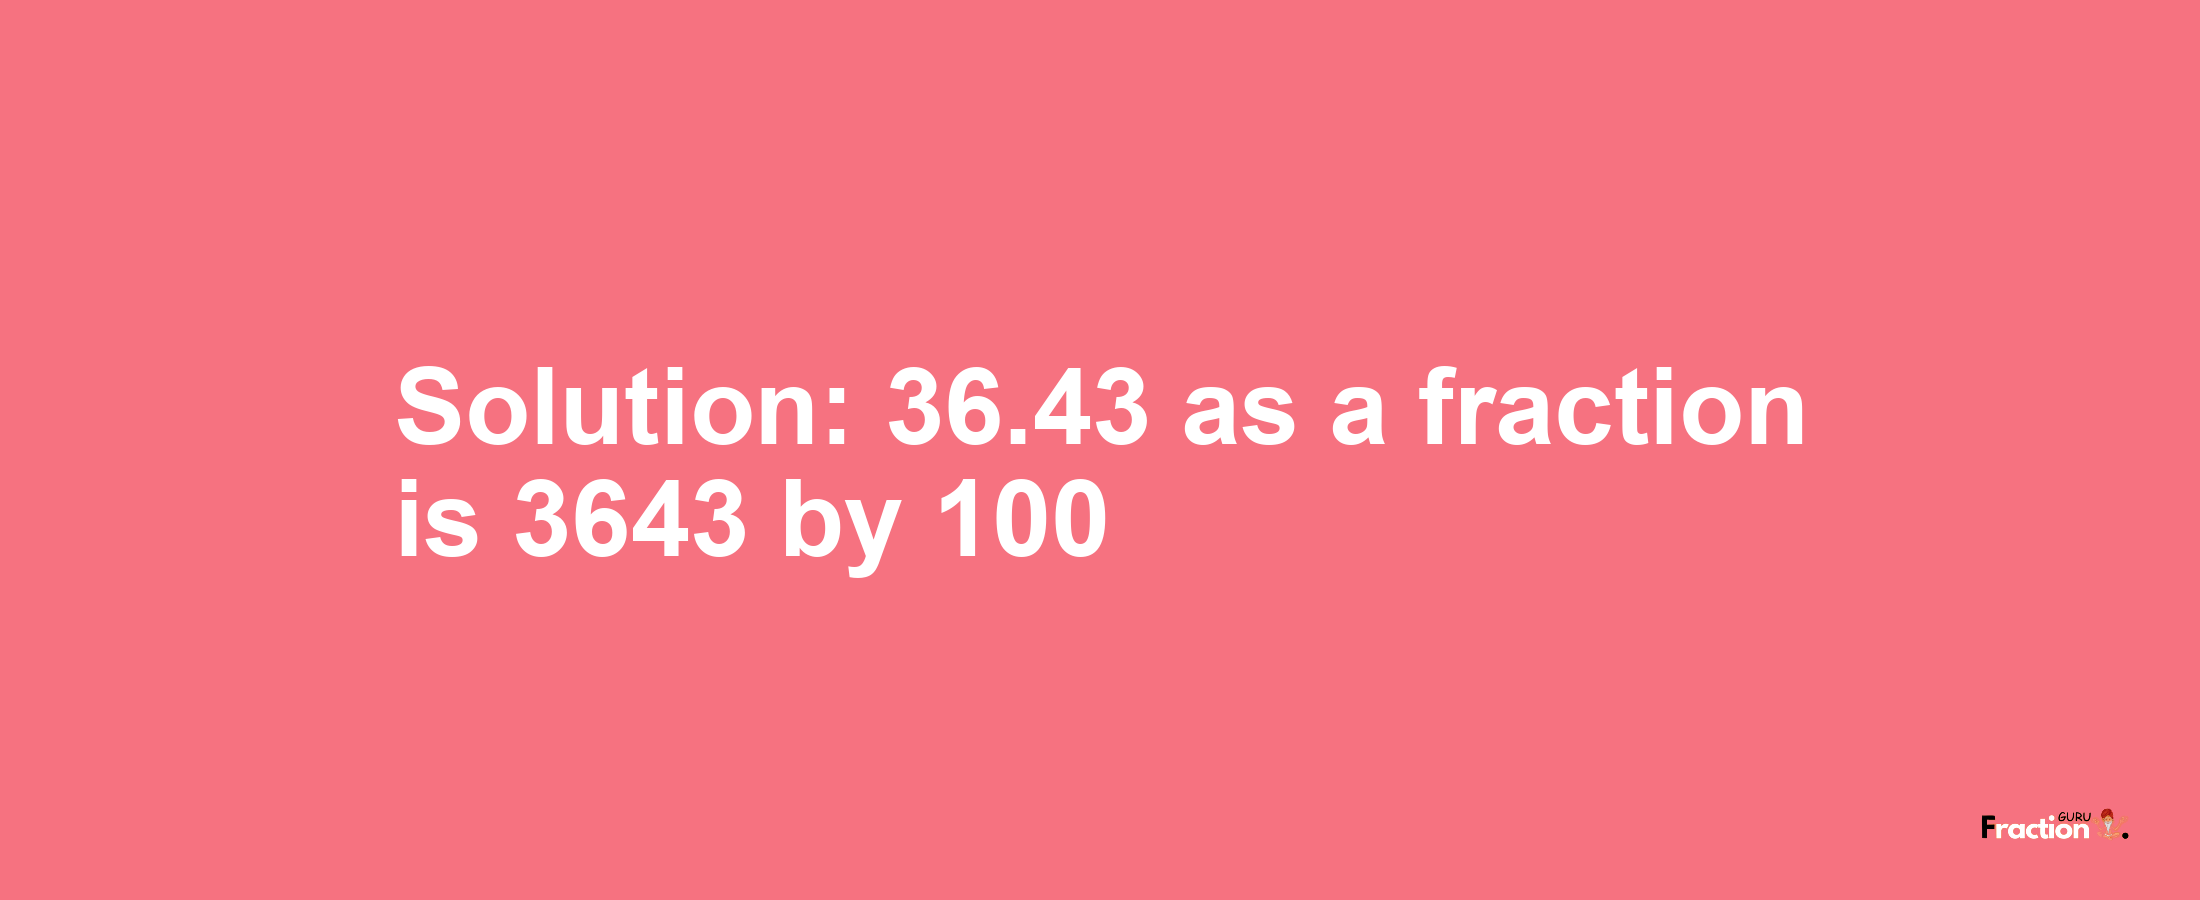 Solution:36.43 as a fraction is 3643/100